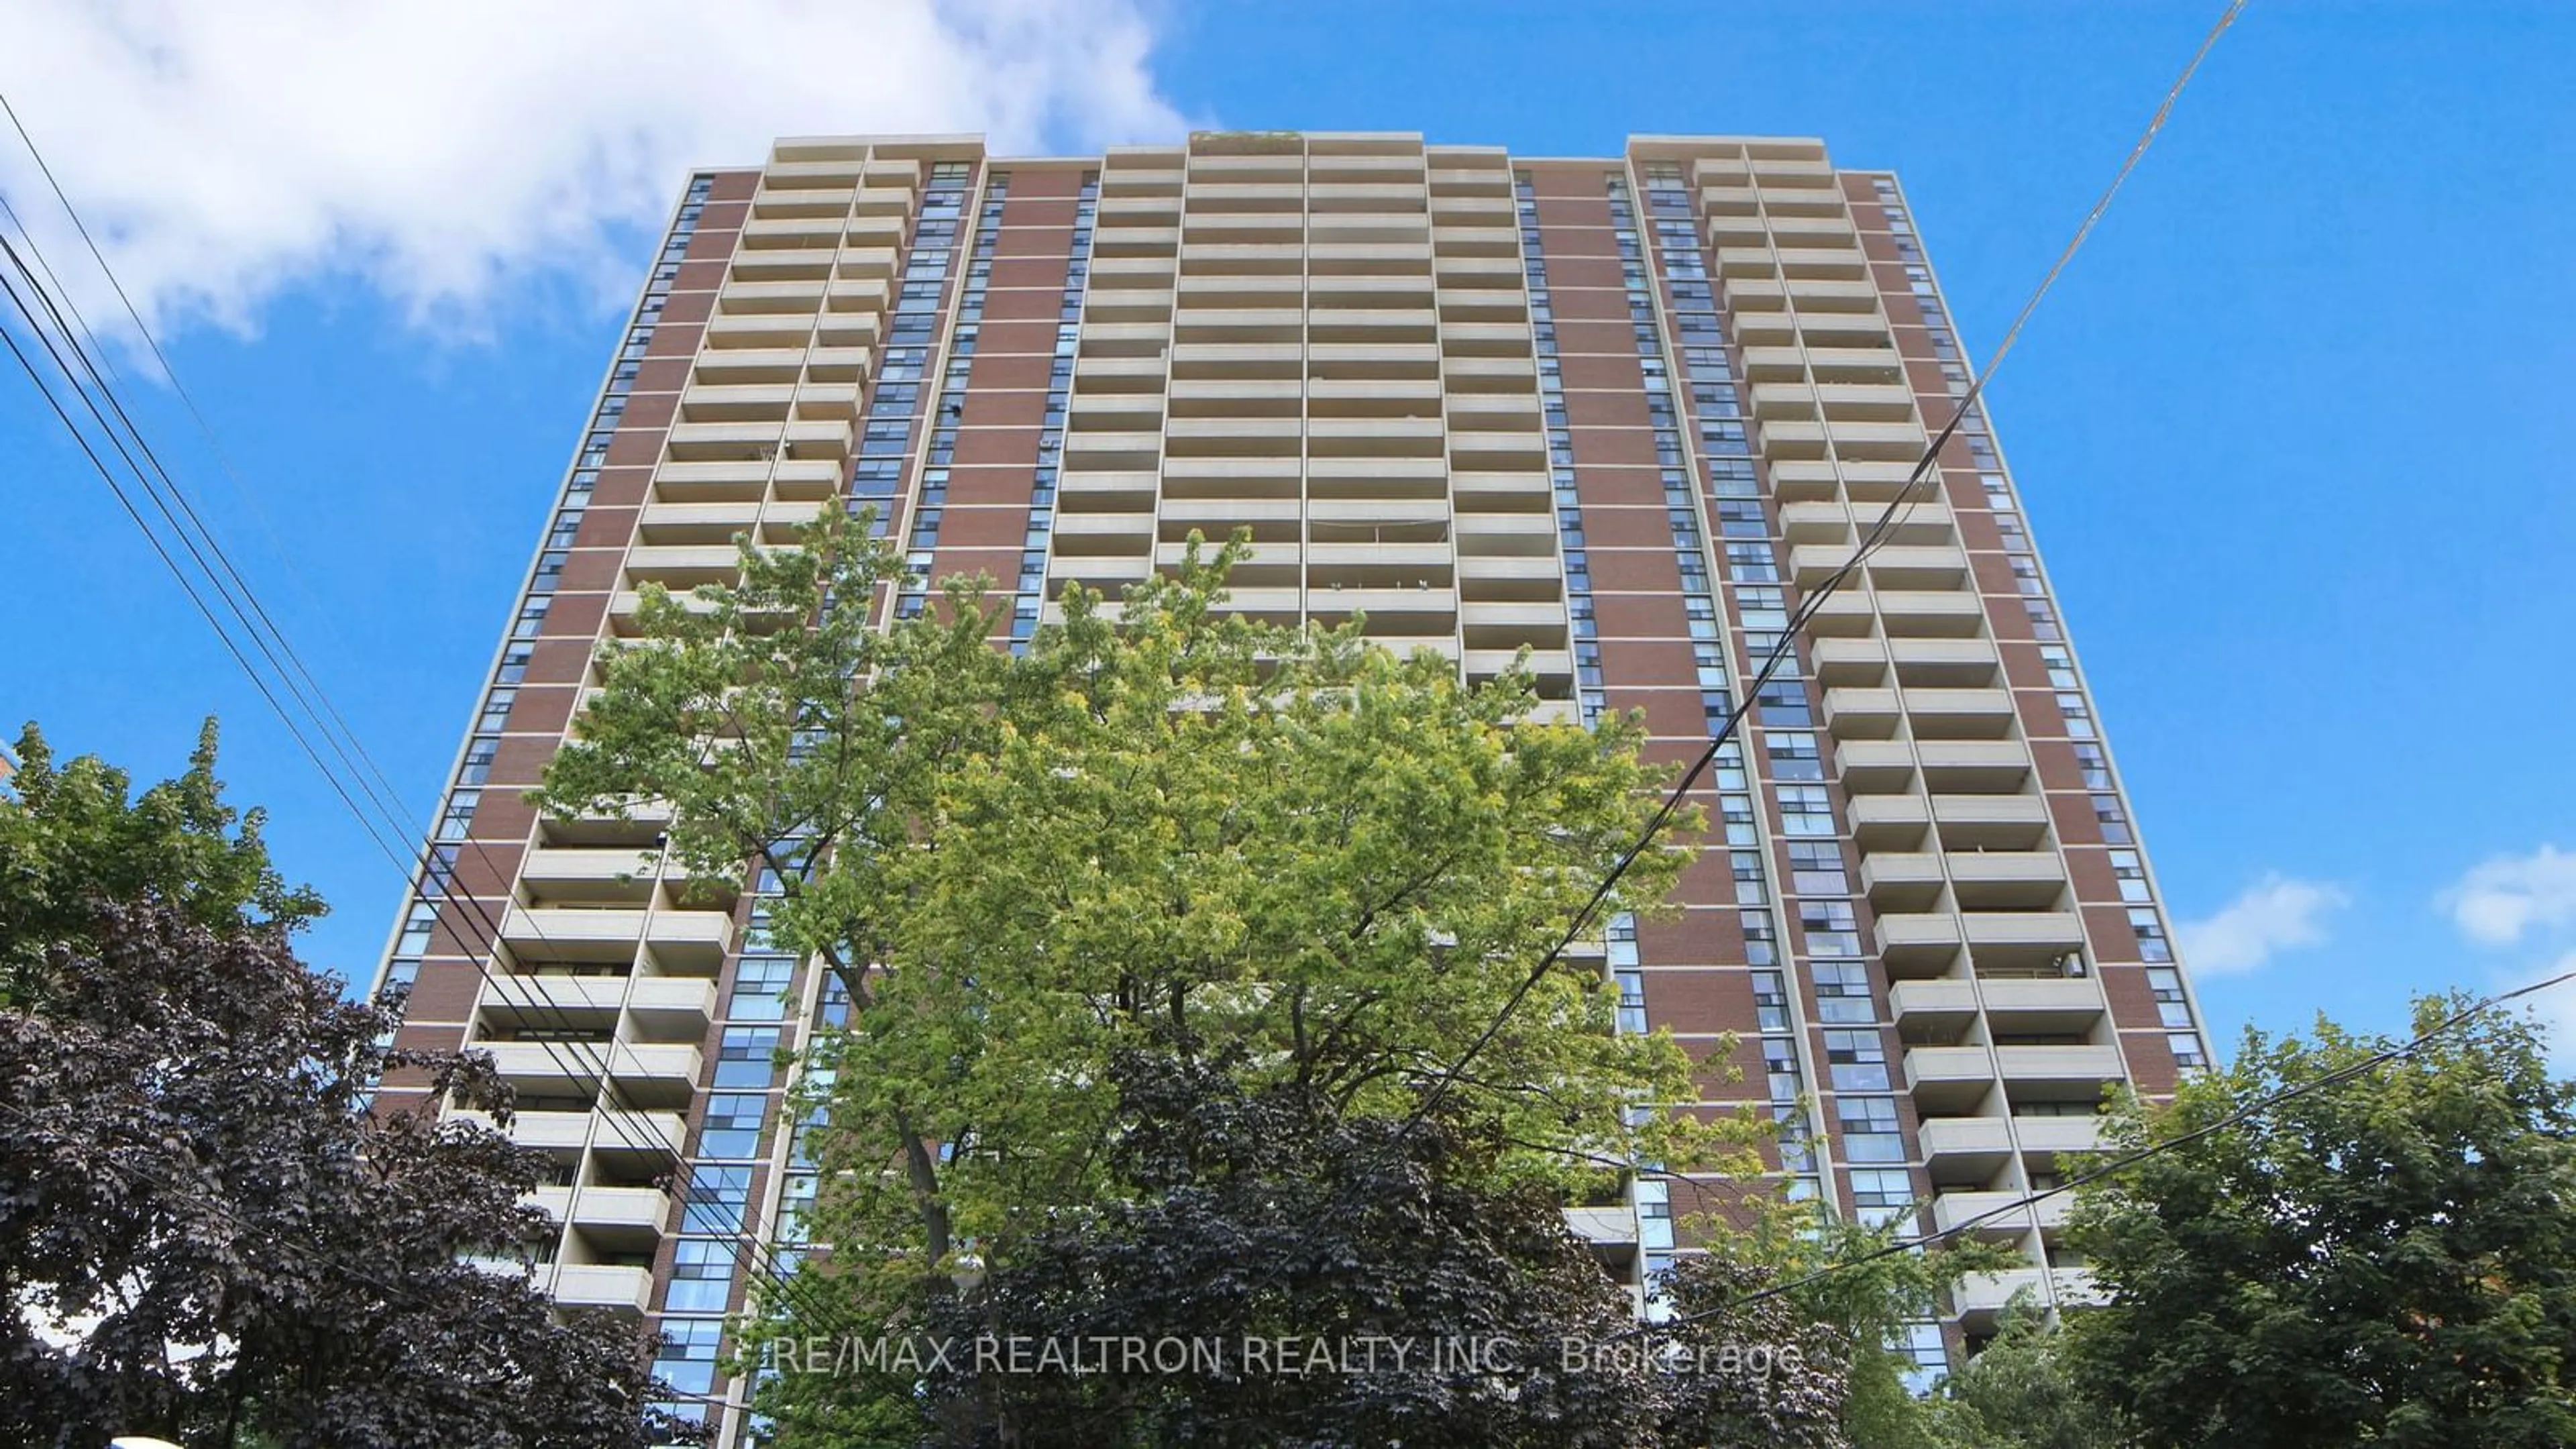 A pic from exterior of the house or condo for 40 Homewood Ave #2216, Toronto Ontario M4Y 2K2